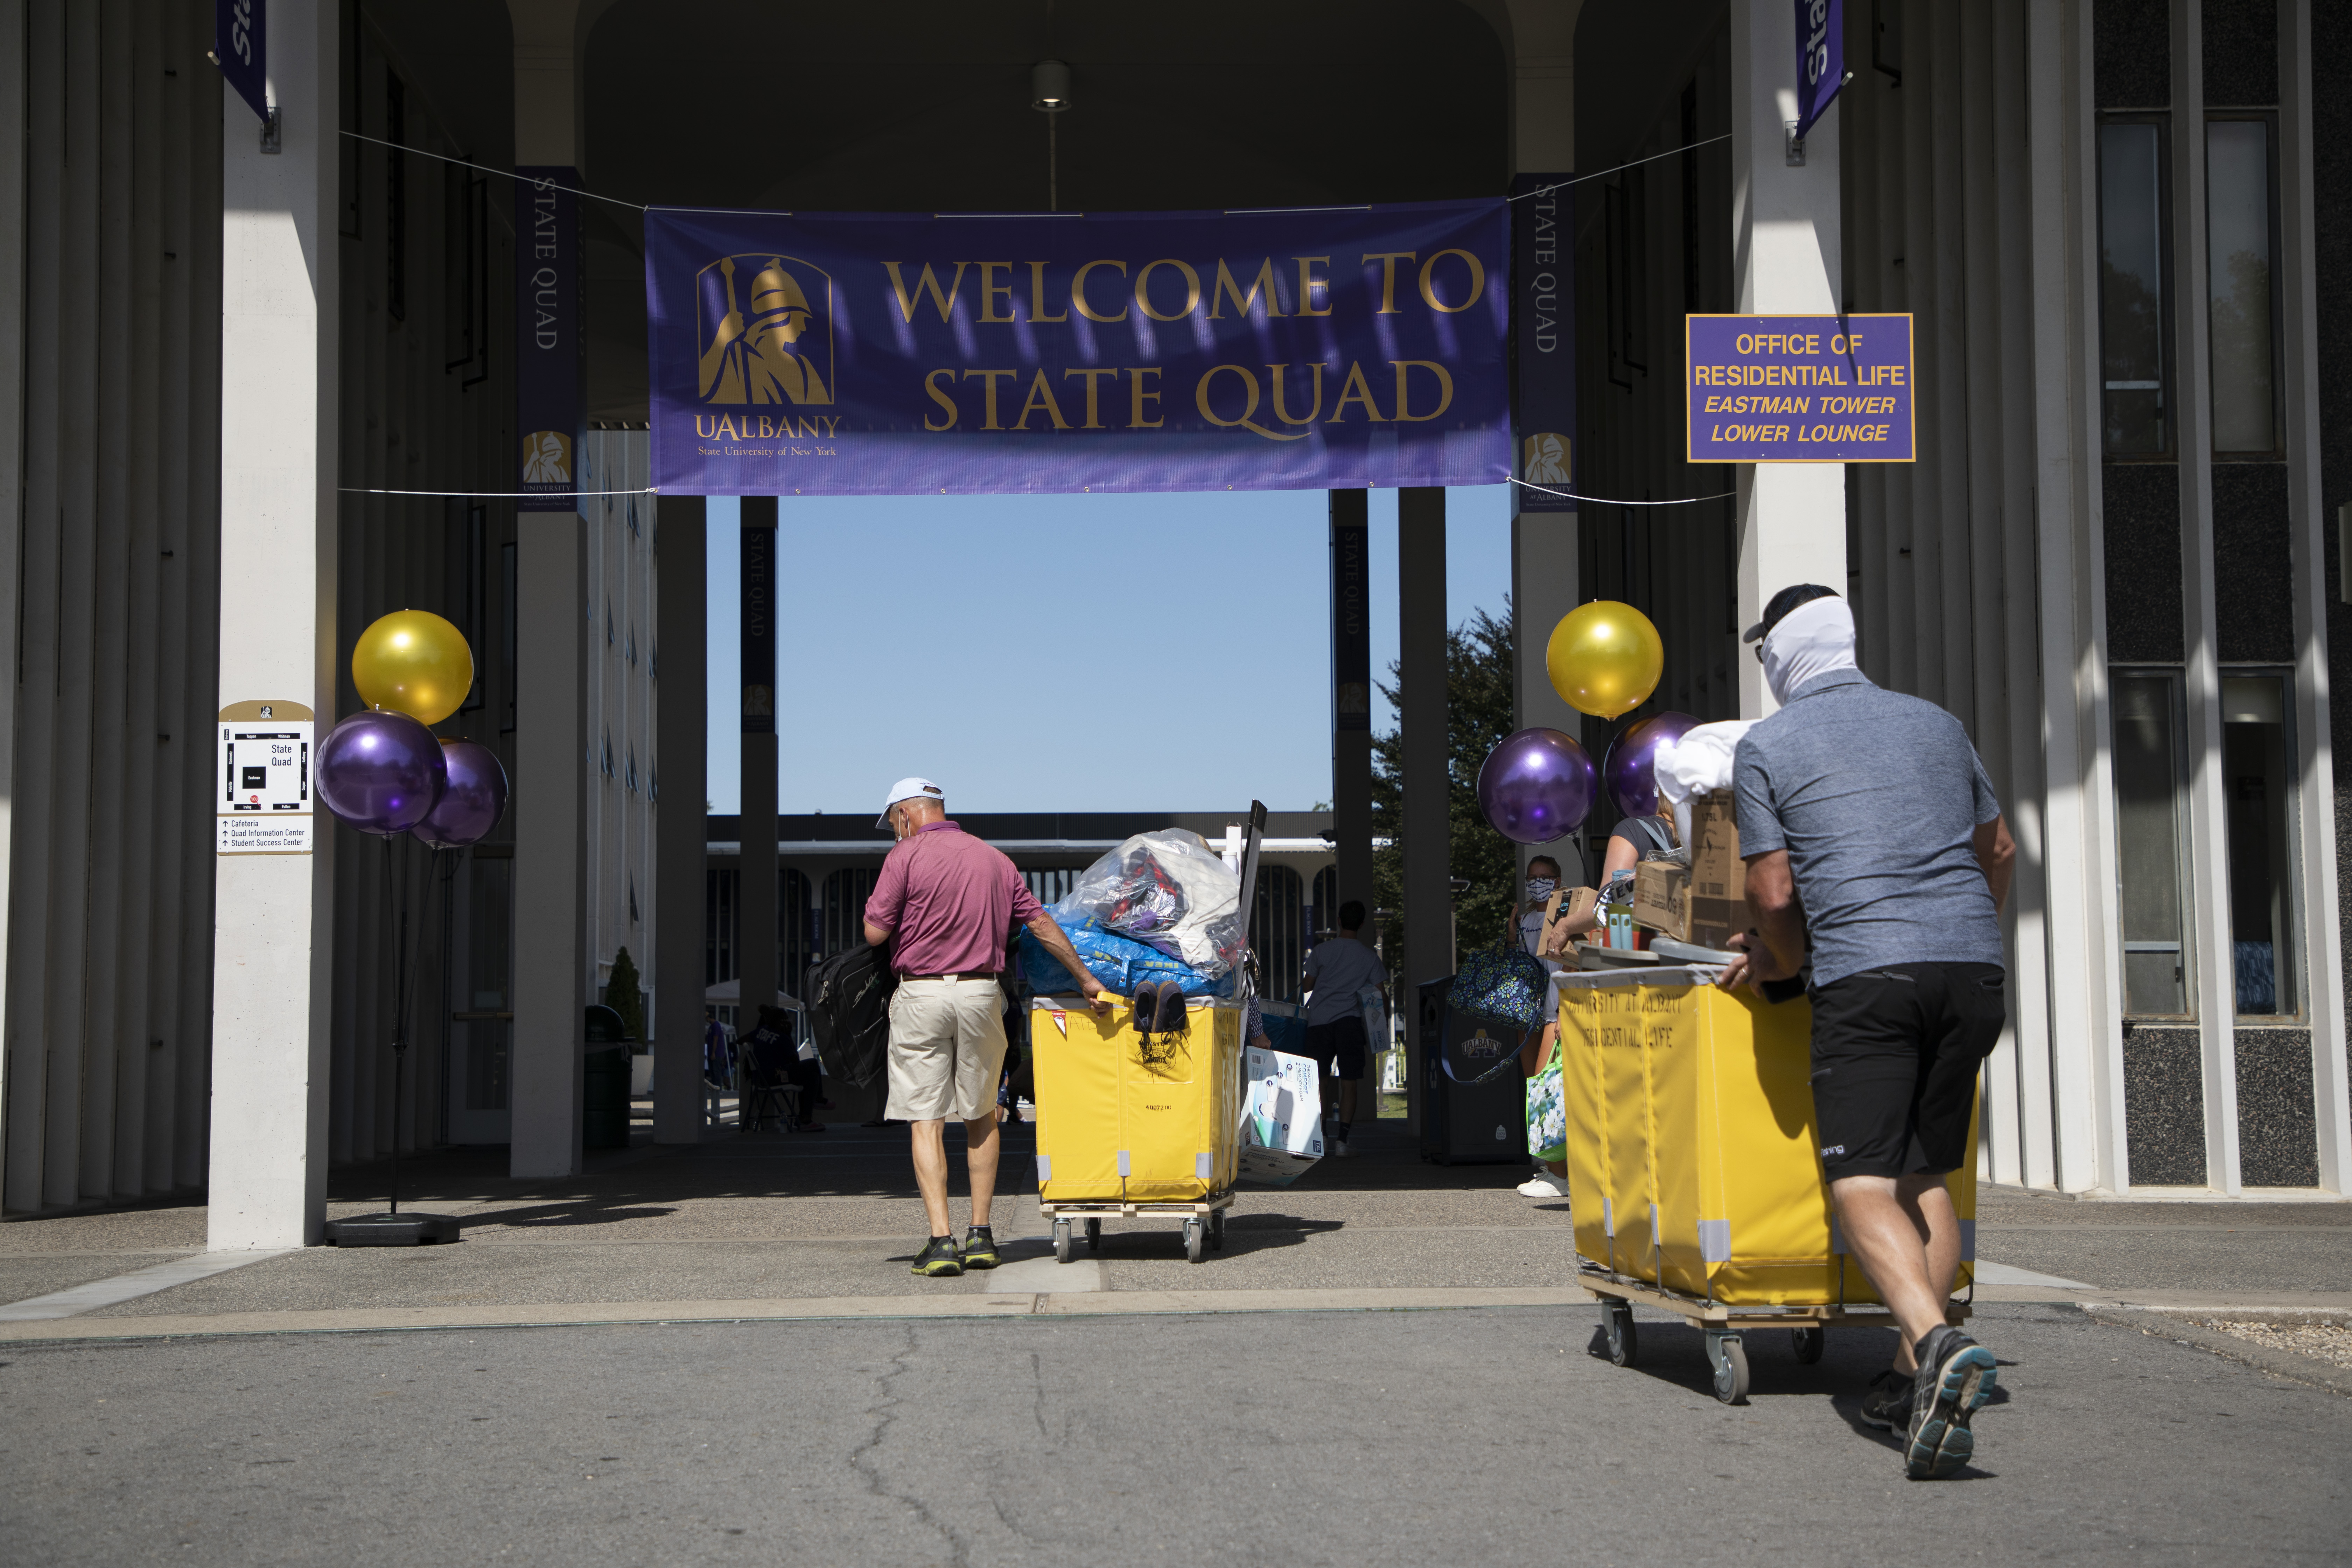 Two parents push yellow carts on move-in day, with a "Welcome to State Quad" banner visible